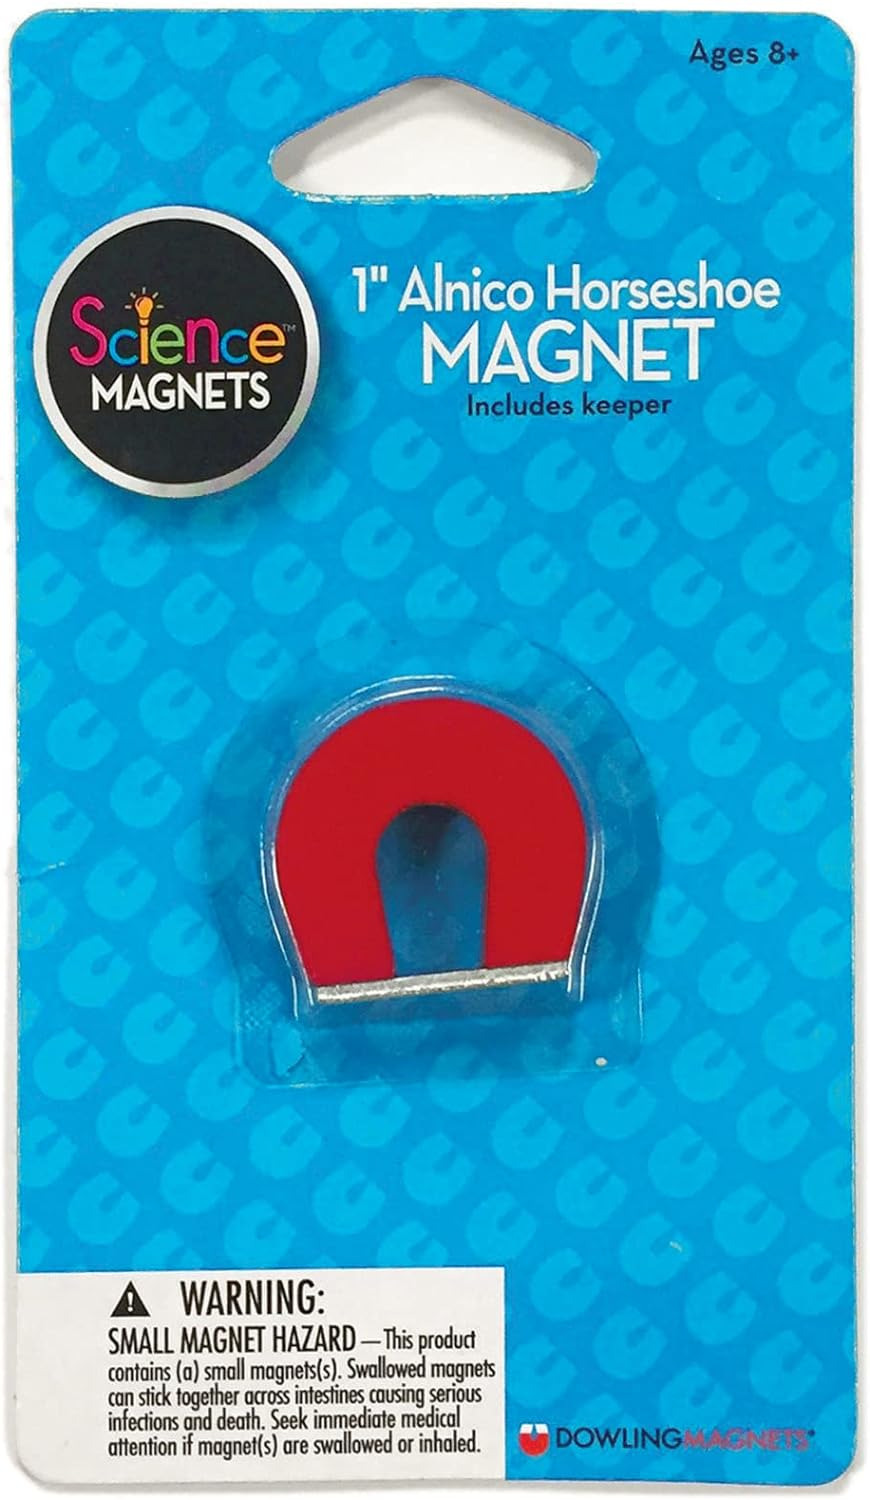 Alnico Horseshoe Magnet (One 1 Inch High Red Small Magnet) and One Keeper. Item 